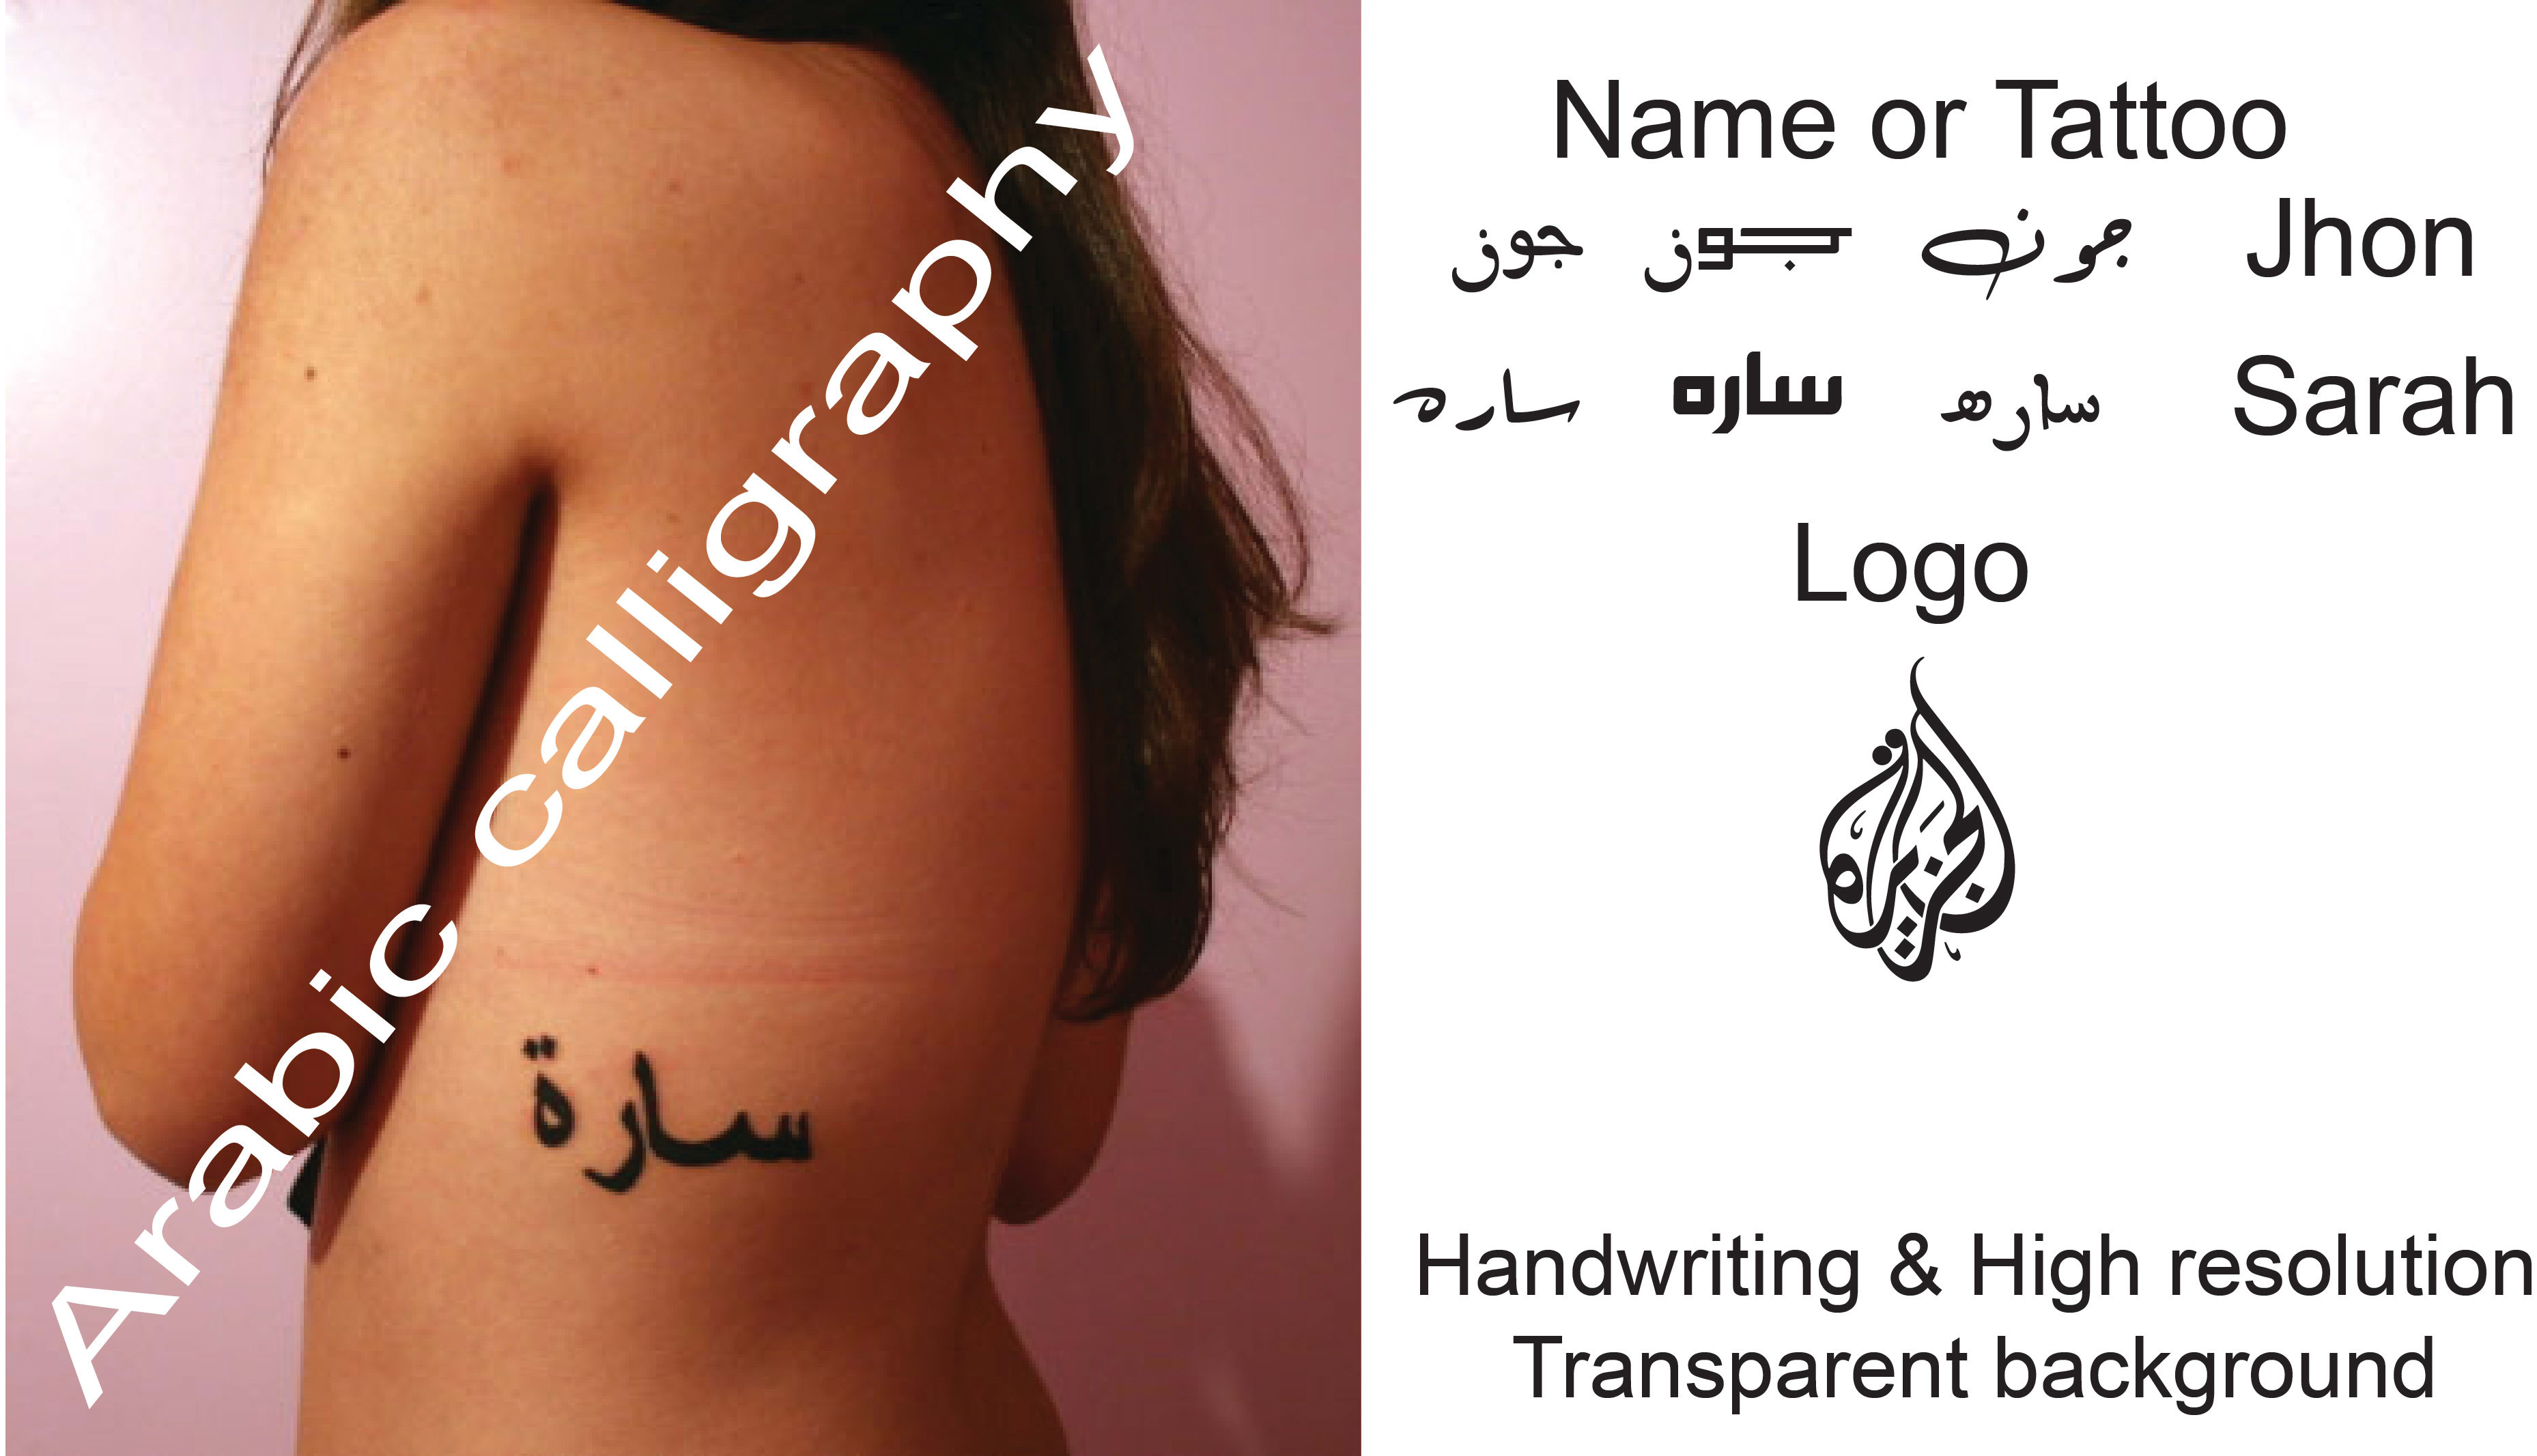 Tattoo your name or create your logo in arabic calligraphy by Mdyassir |  Fiverr